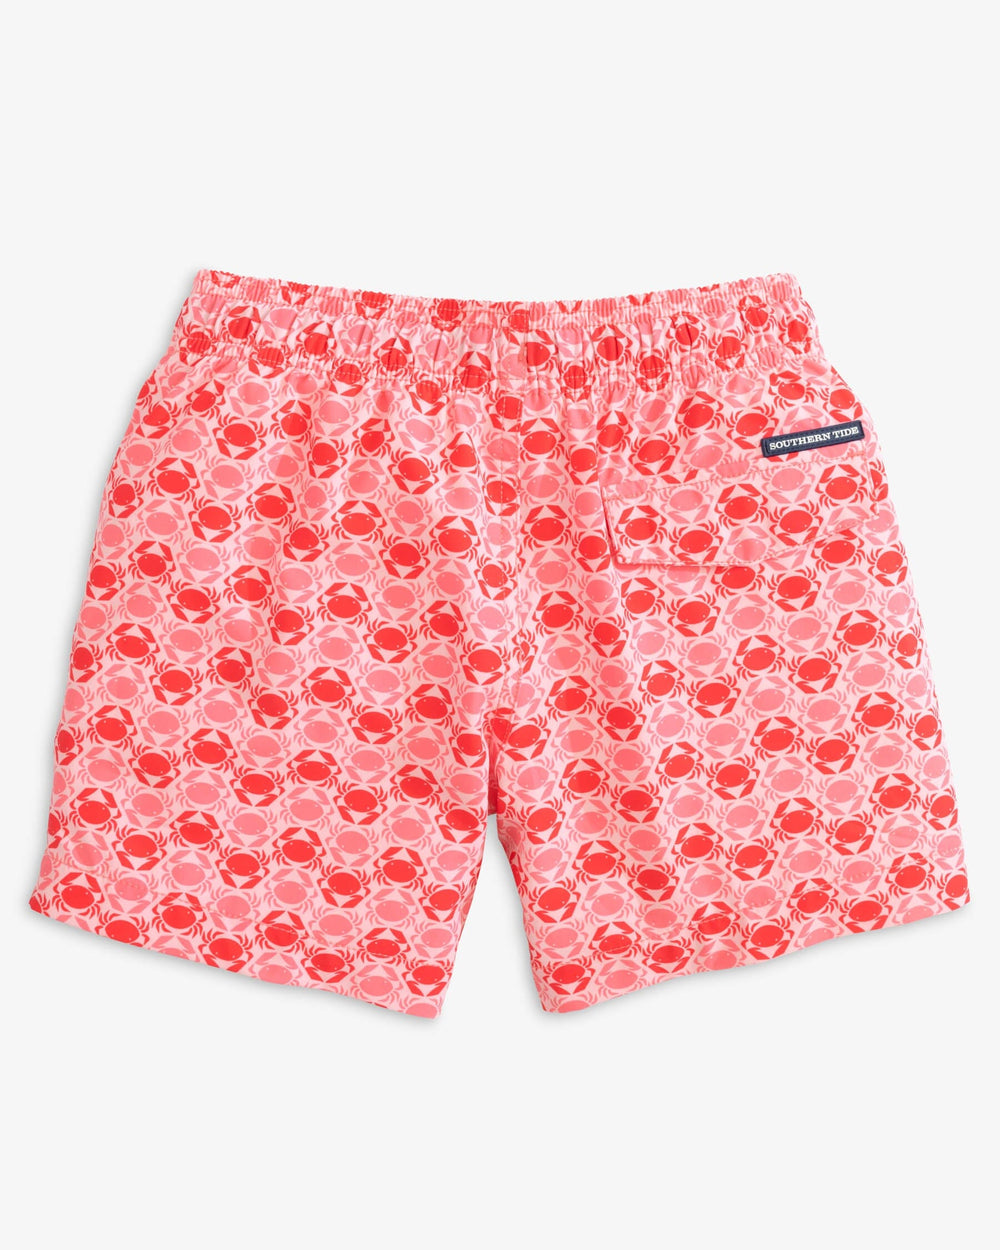 The back view of the Southern Tide Boys Why So Crabby Printed Swim Trunk by Southern Tide - Rose Blush